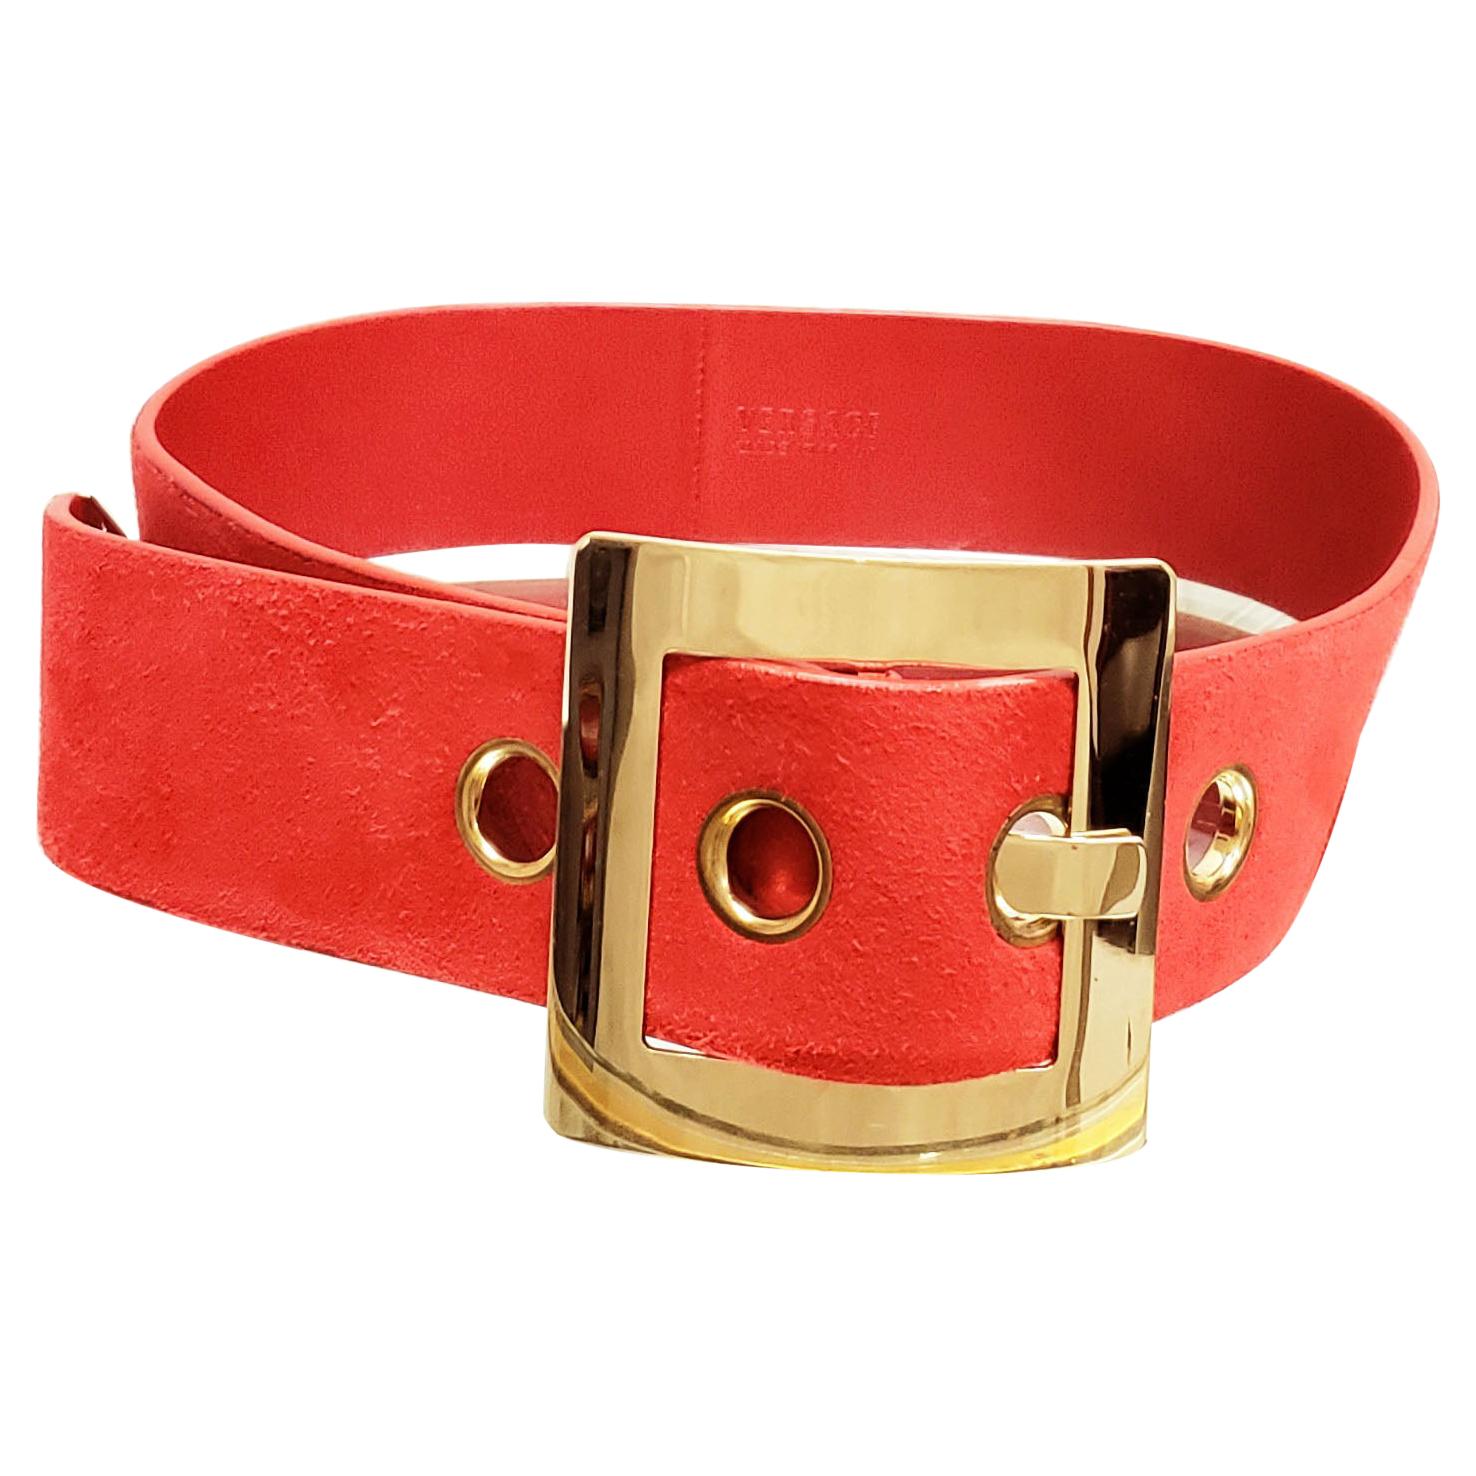 F/W 2015 VERSACE RED SUEDE BELT w/GOLD TONE BUCKLE